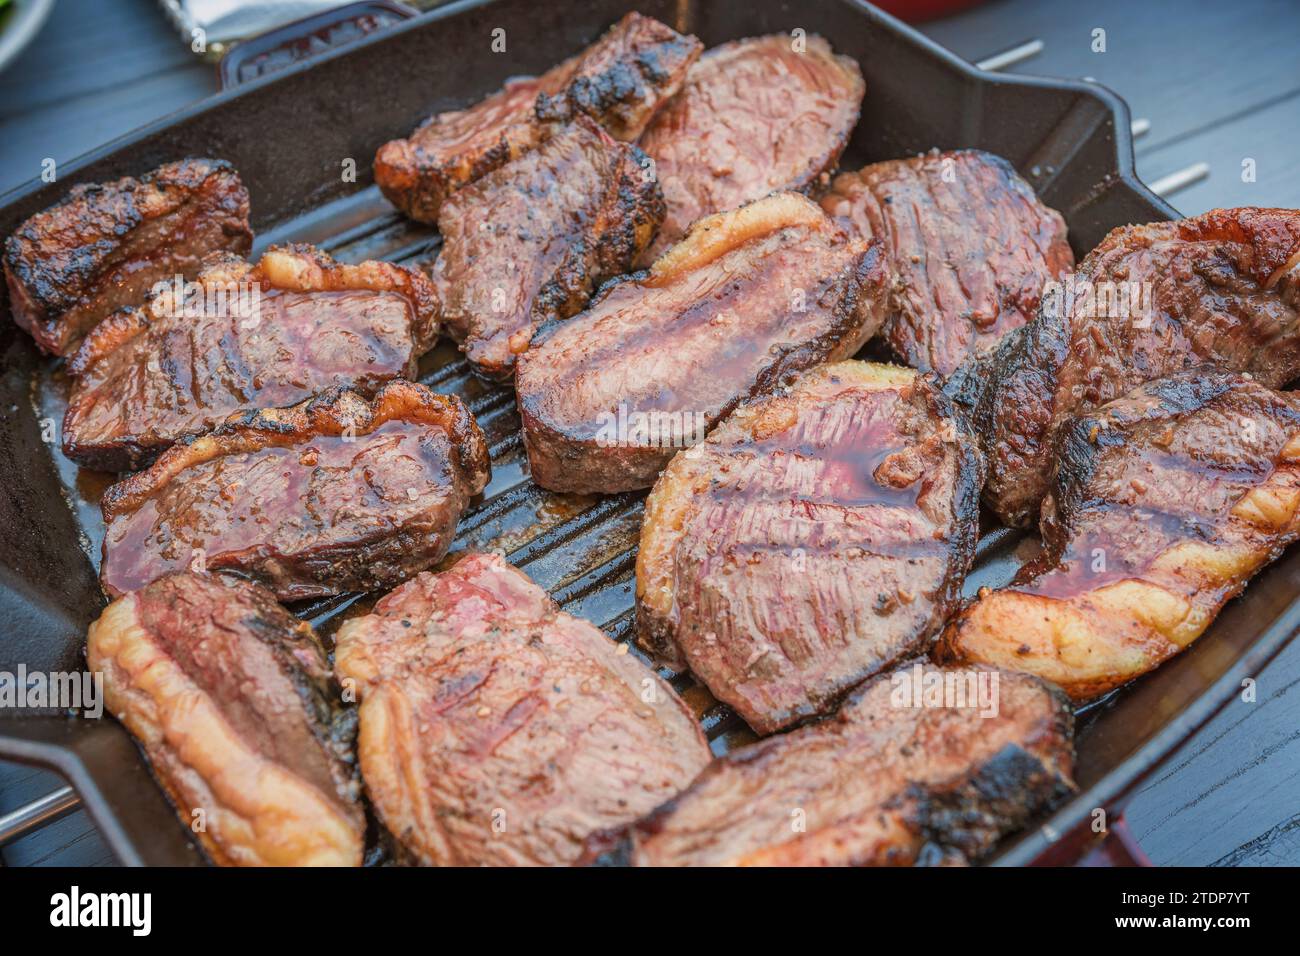 Grilled sirloin or rump fillets seen up close in the frying pan. Stock Photo